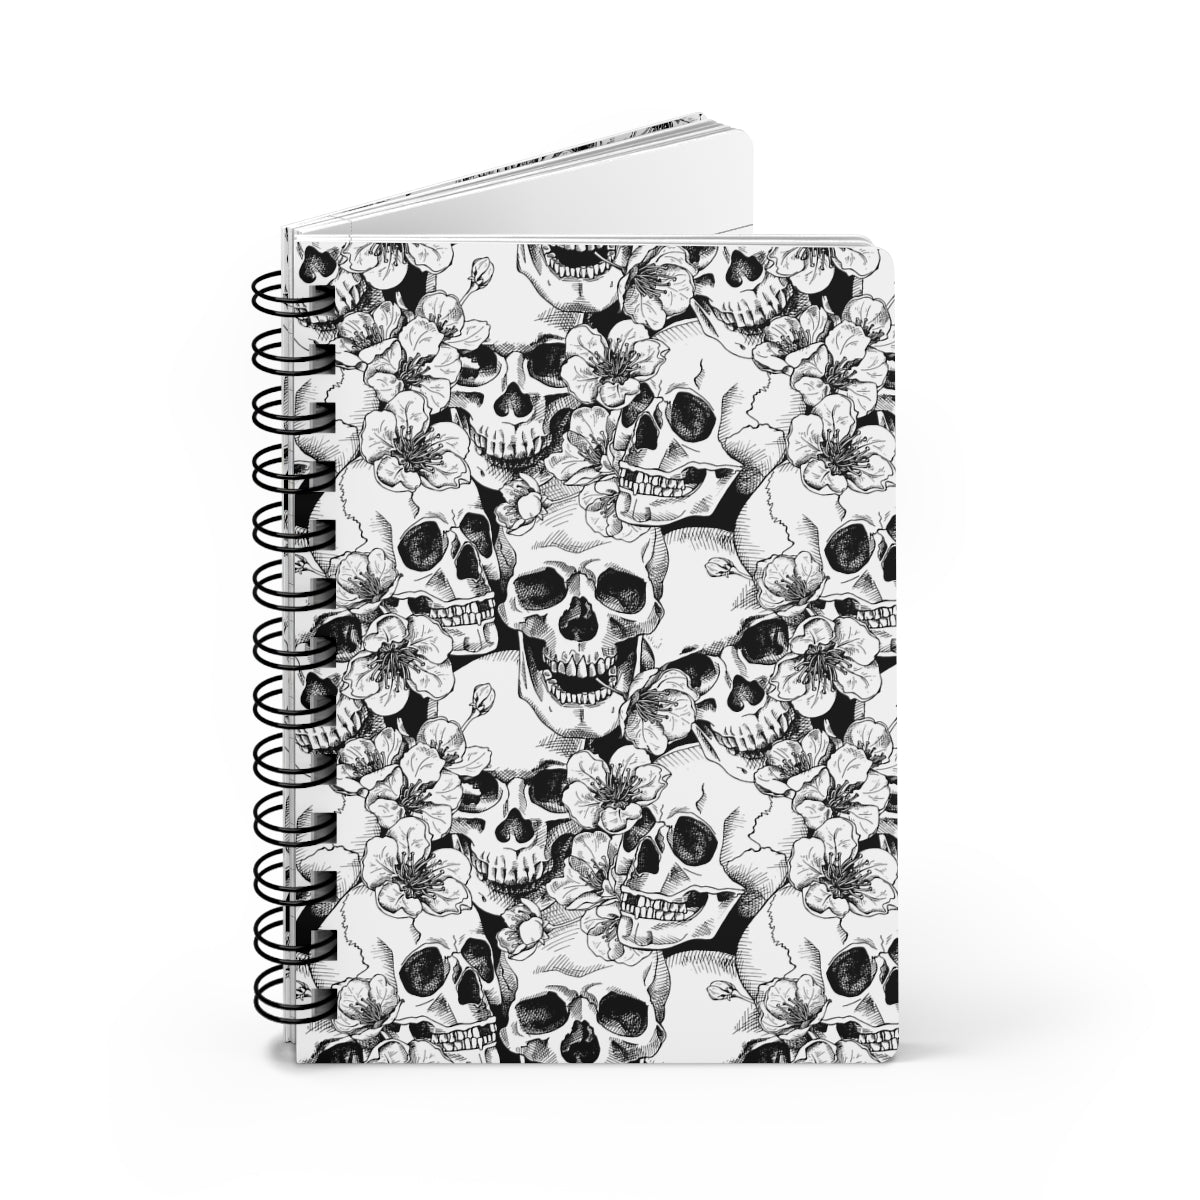 Skulls and Flowers Spiral Bound Journal - Puffin Lime